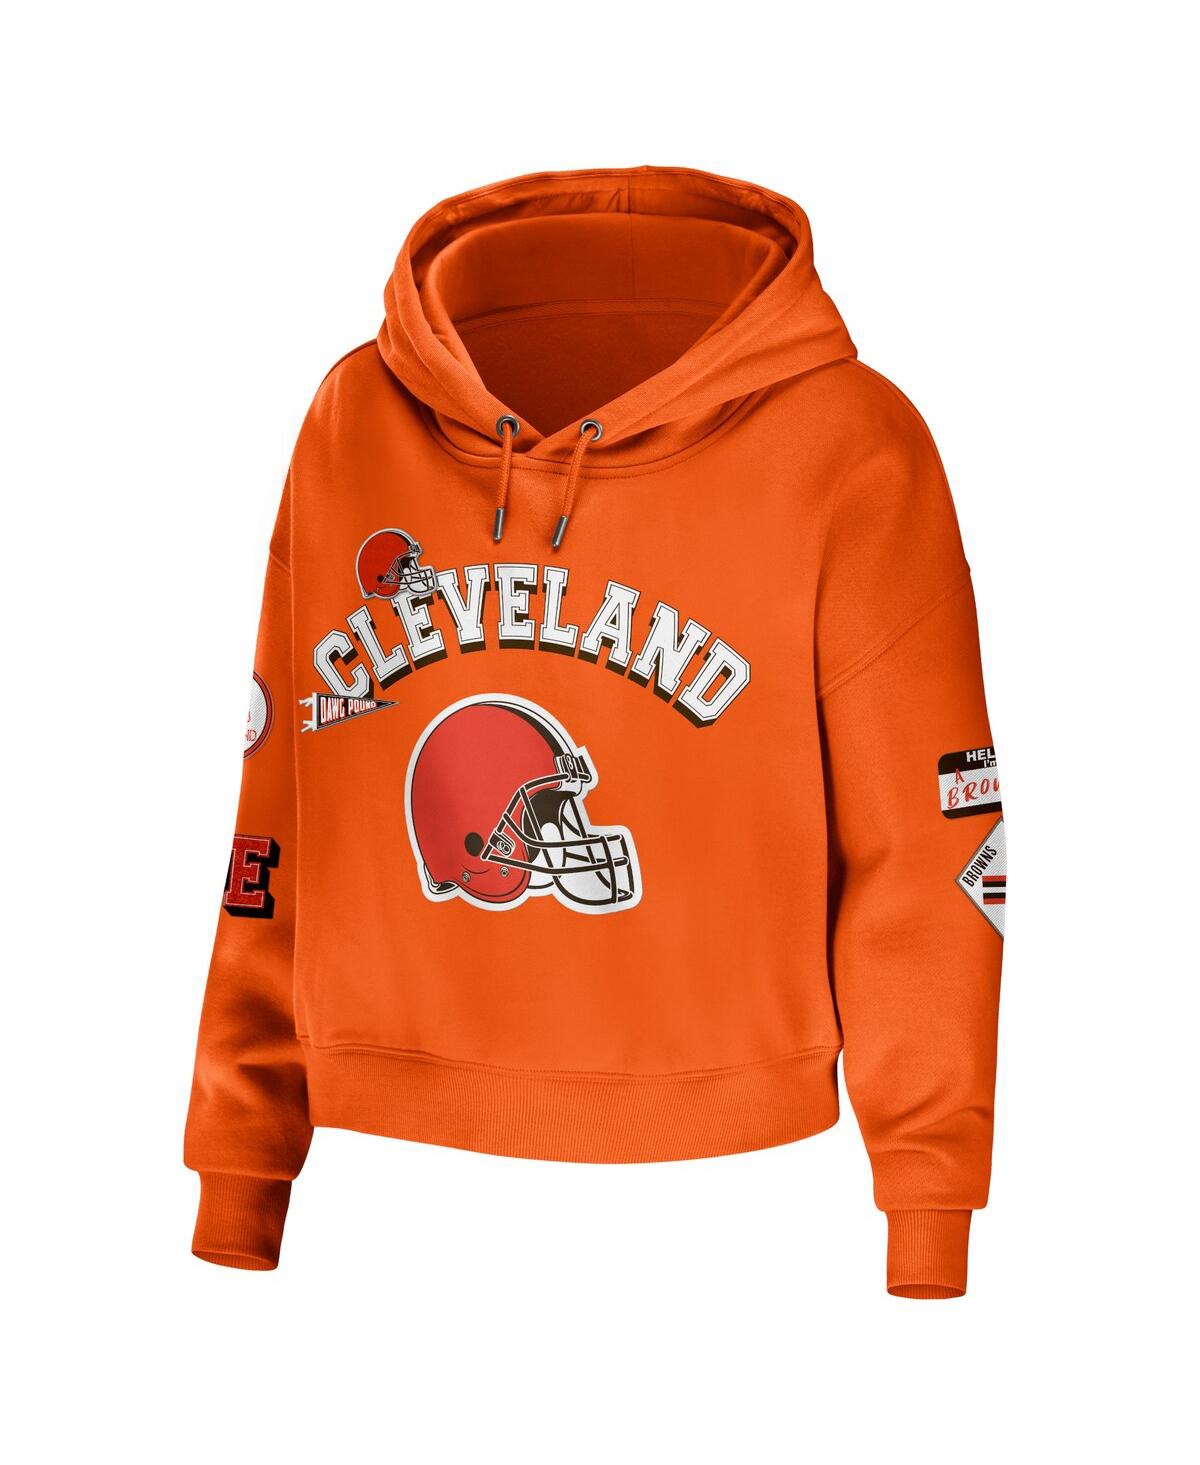 Shop Wear By Erin Andrews Women's  Orange Cleveland Browns Modest Cropped Pullover Hoodie